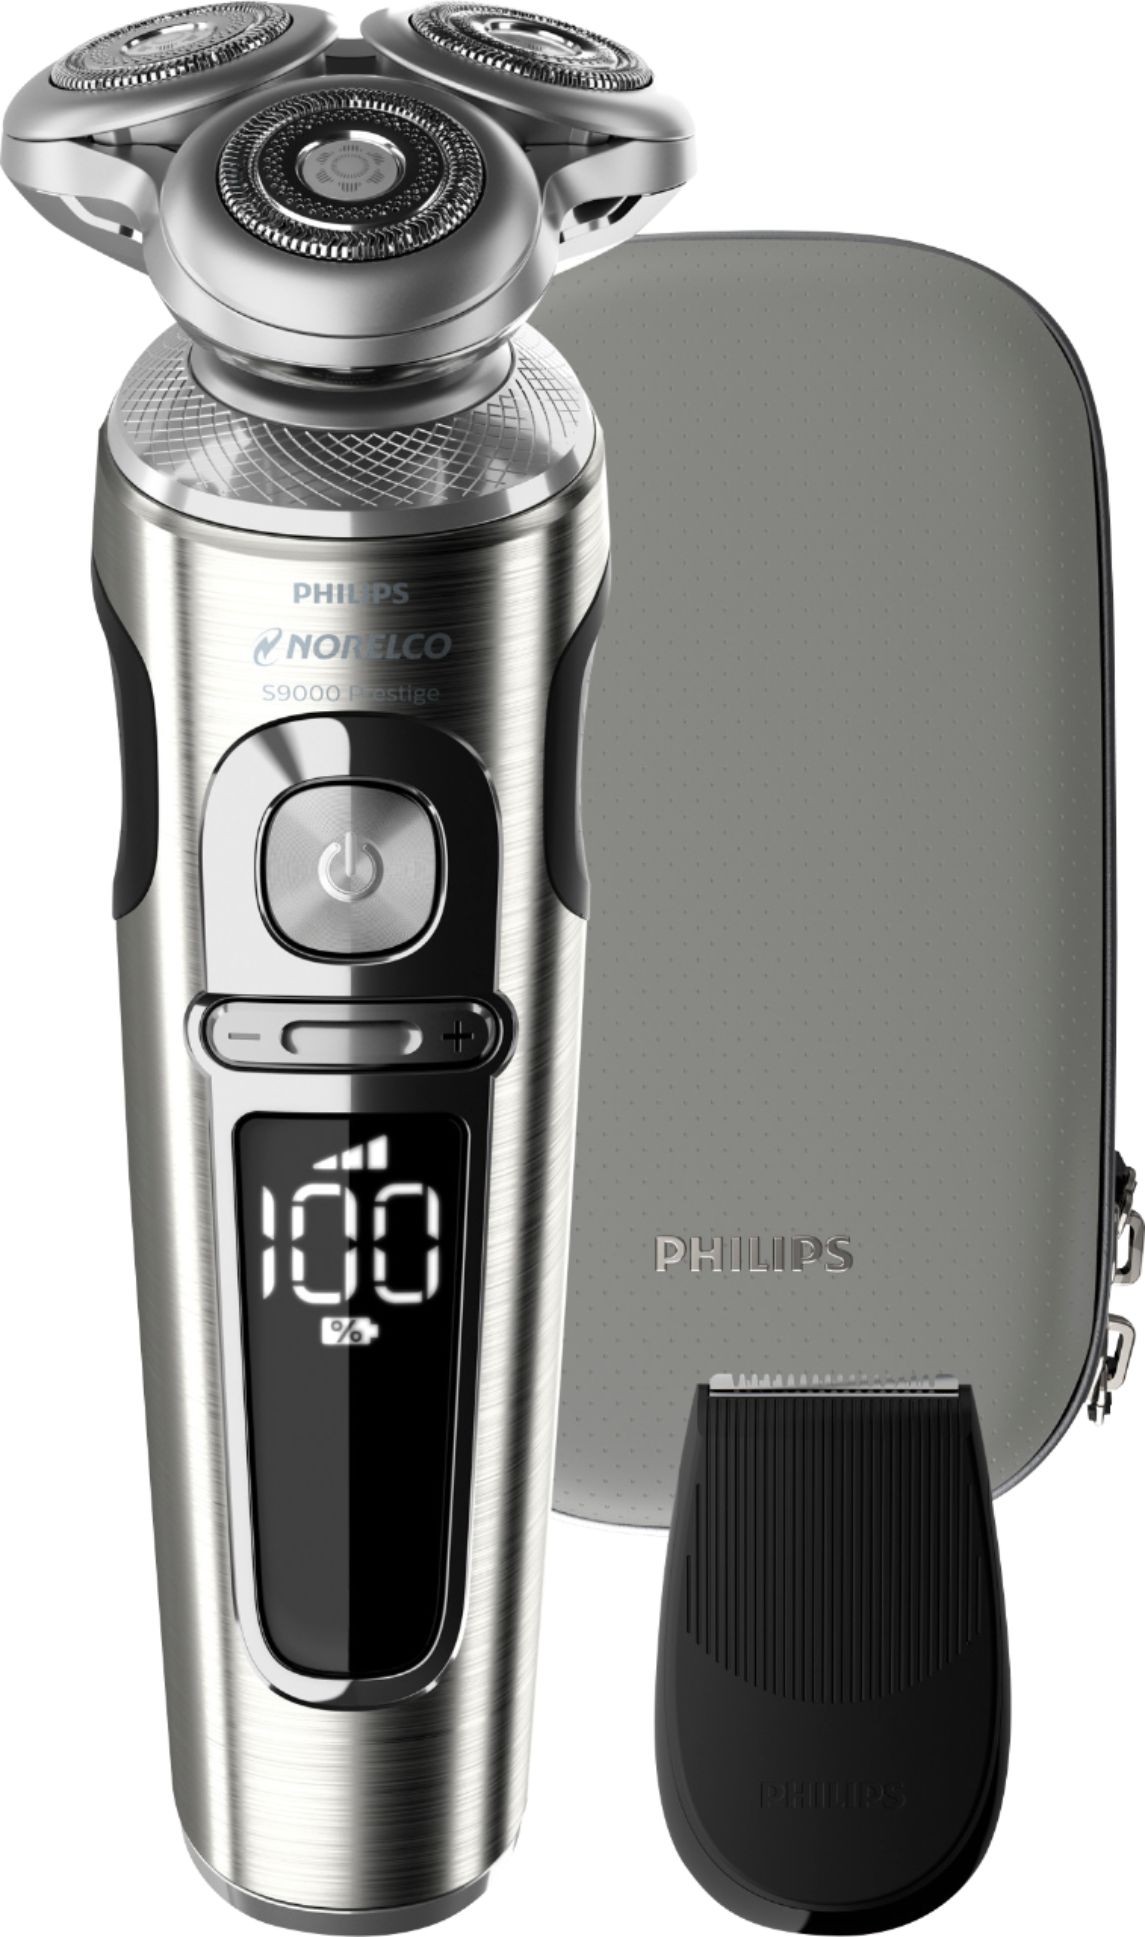 Left View: Philips Norelco - S9000 Prestige Electric Shaver - Light Brushed Chrome